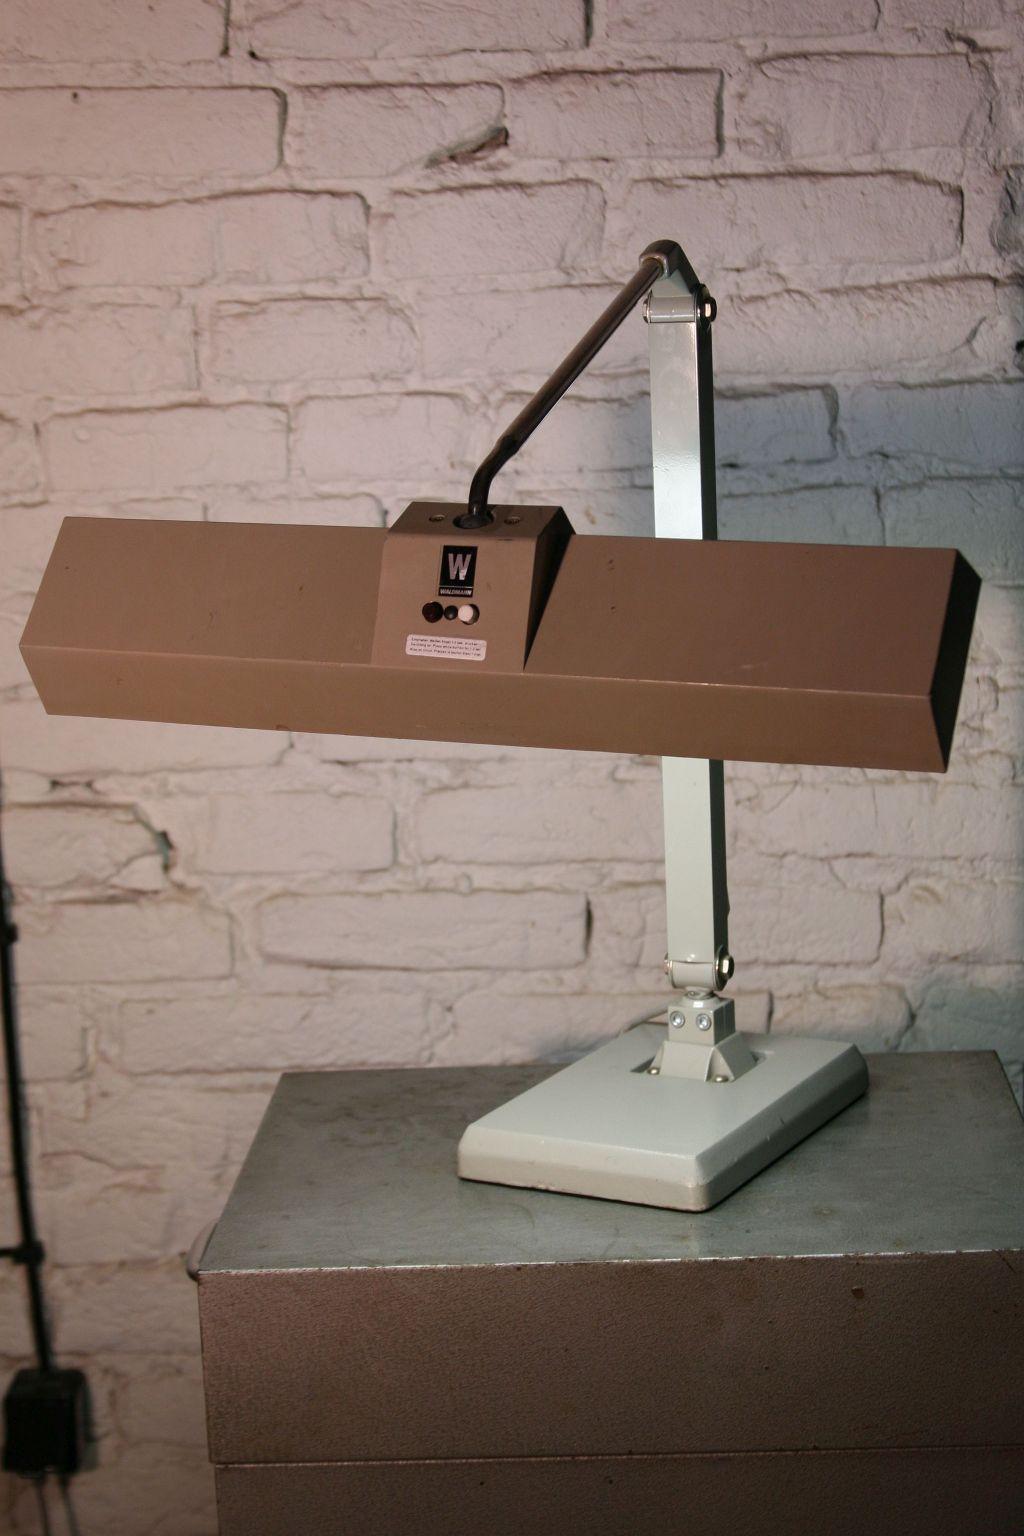 1970s Vintage Waldmann table lamp Model STK 215.
The original desk lamp produced in the 1970s by the German company Waldmann.
Construction;
Very heavy cast iron, stable base, two-part arm with fully adjustable lamp inclination, built-in plastic